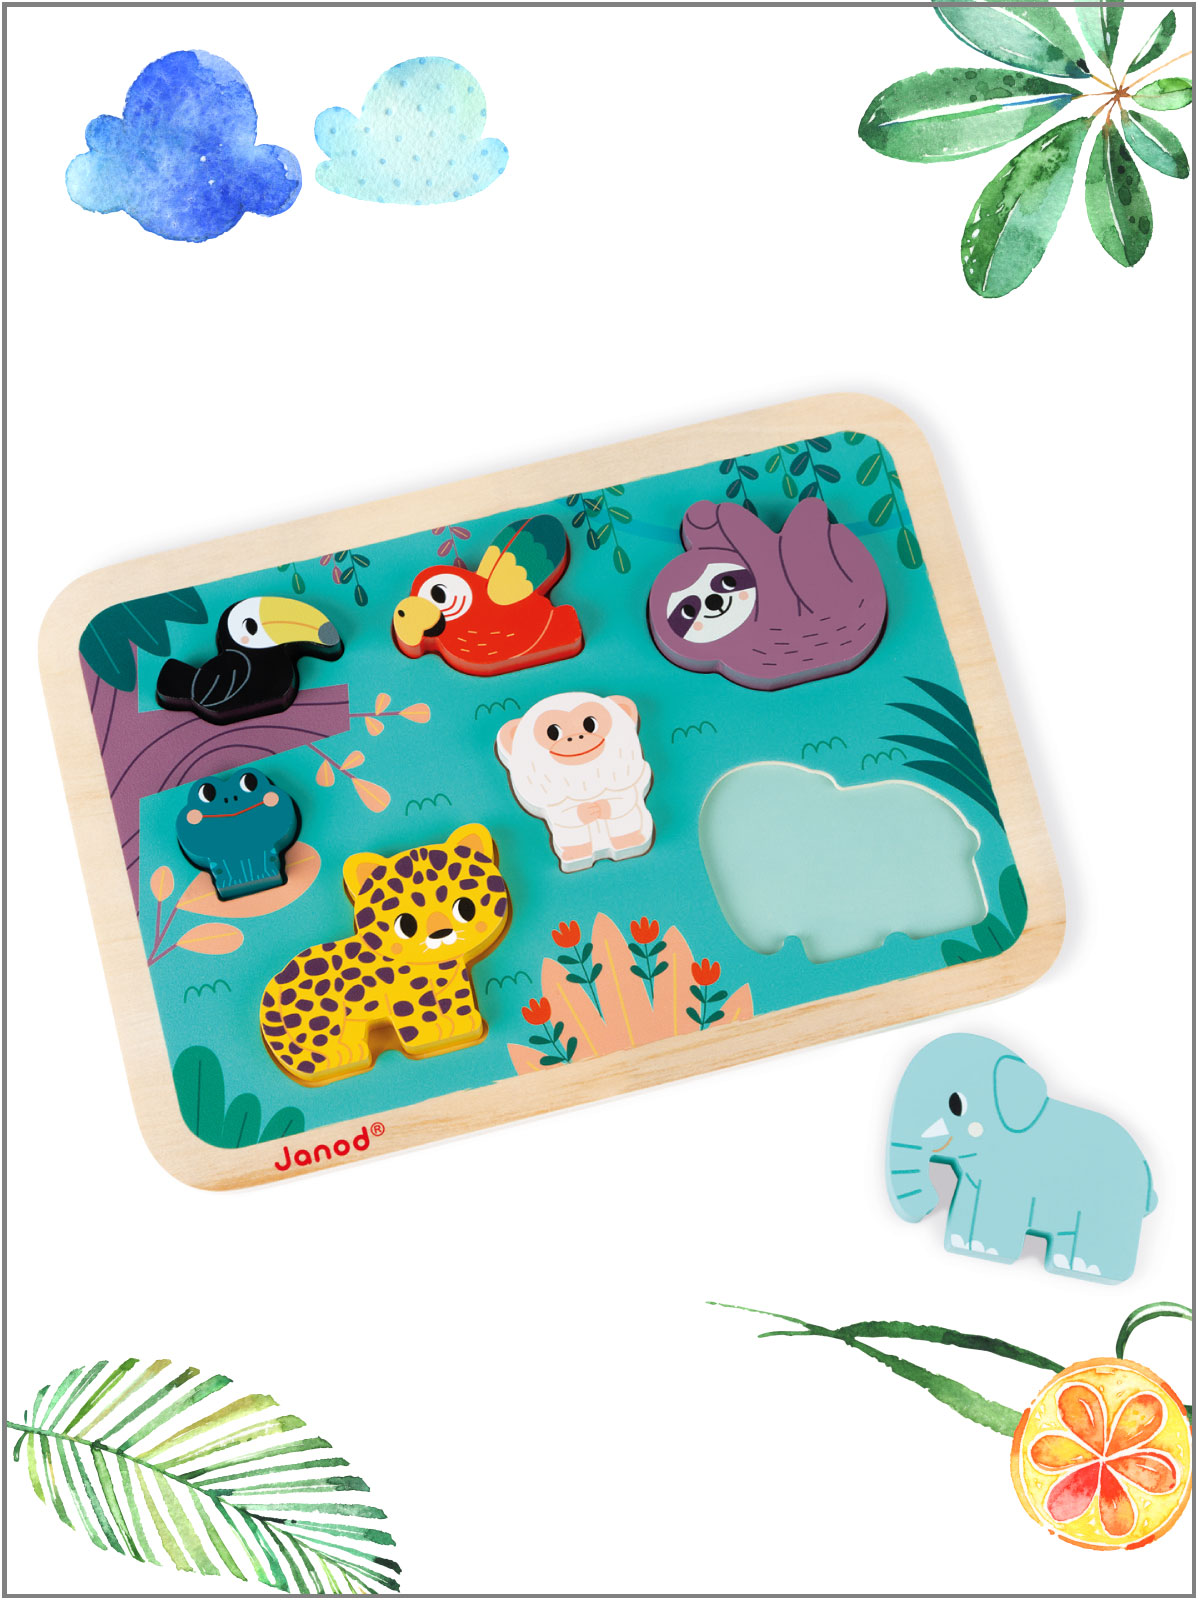 frederickandsophie-kids-toys-janod-france-puzzle-chunky-jungle-WWF-play